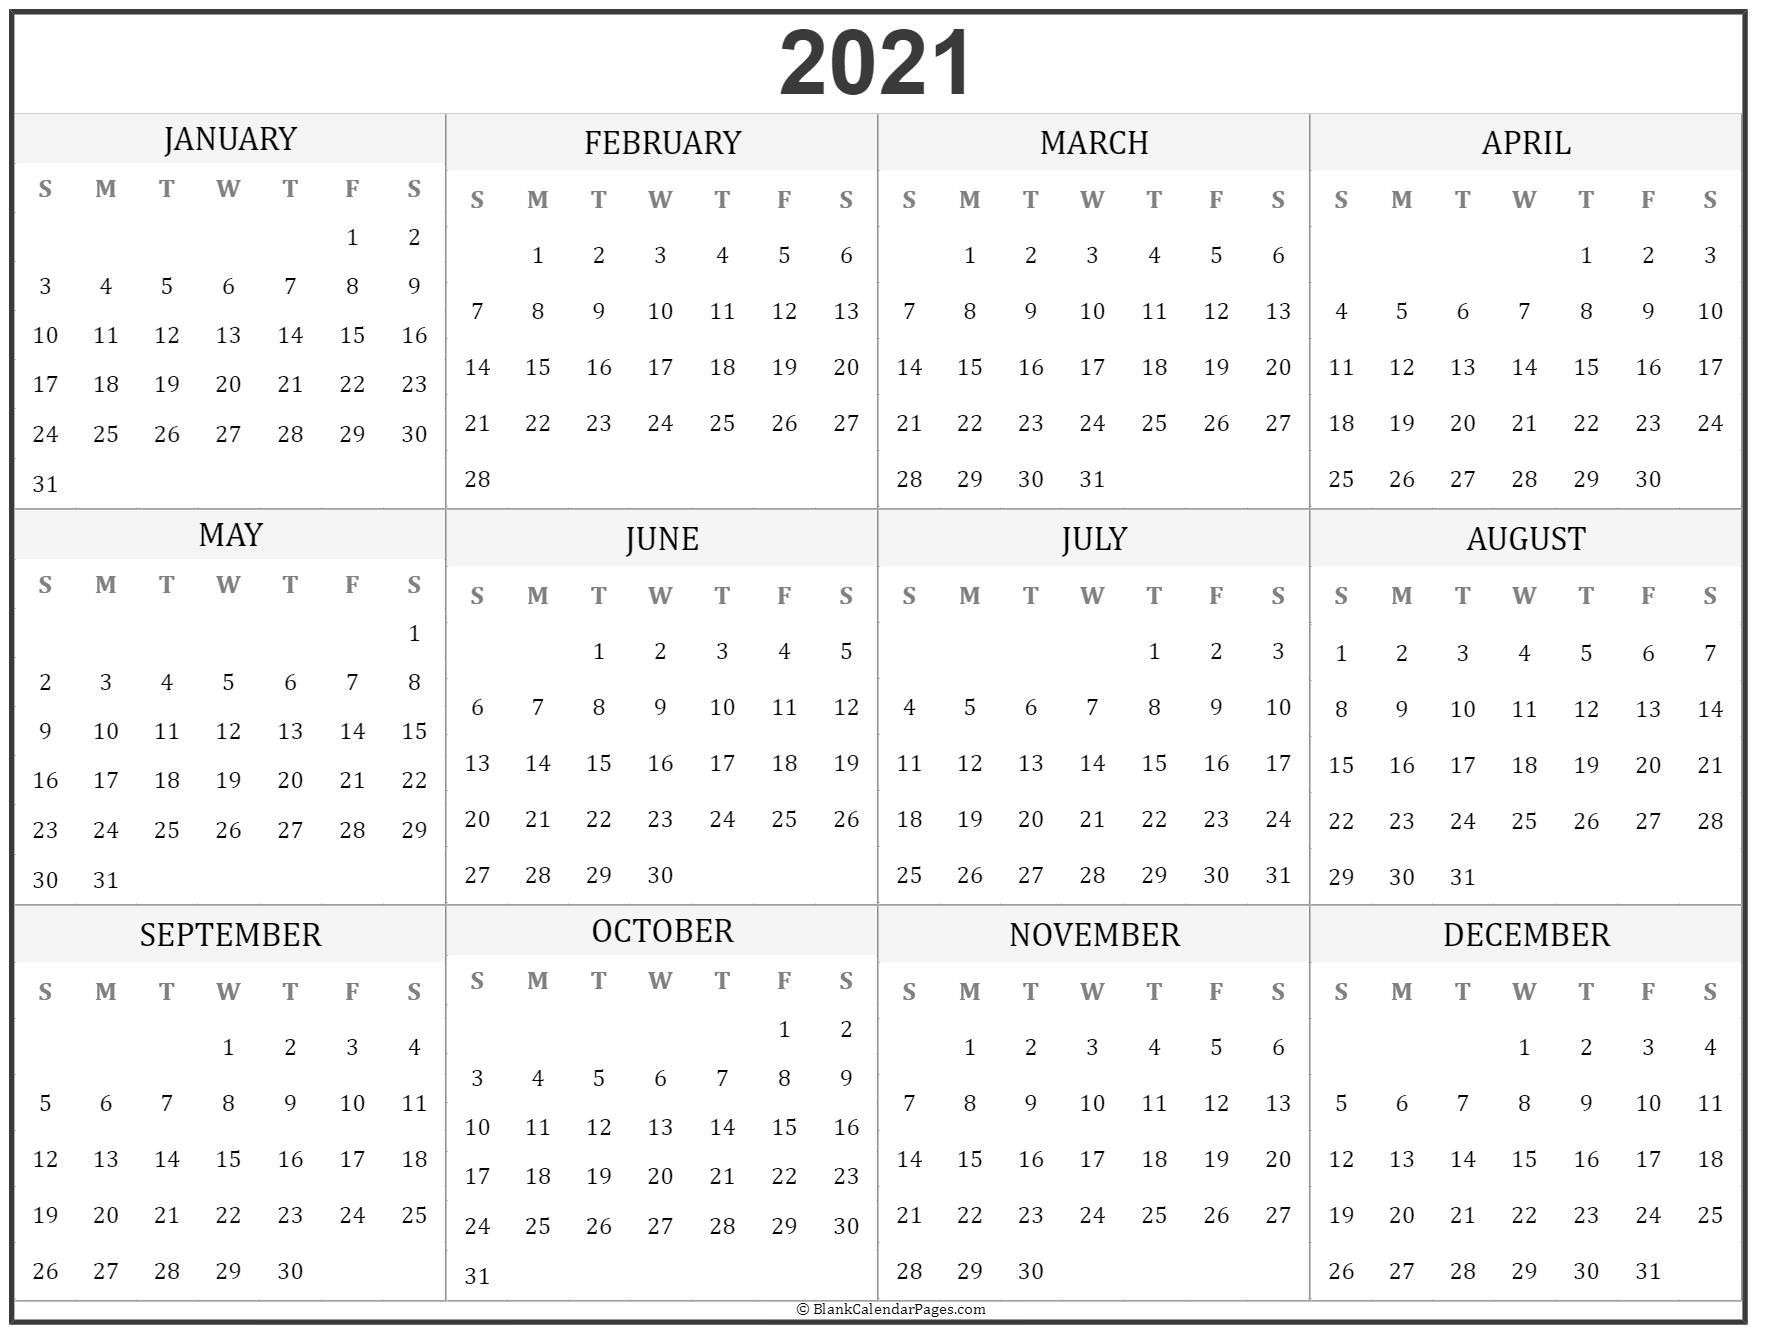 2021 Year Calendar | Yearly Printable-2021 Yearly Calendar Printable Free With Notes